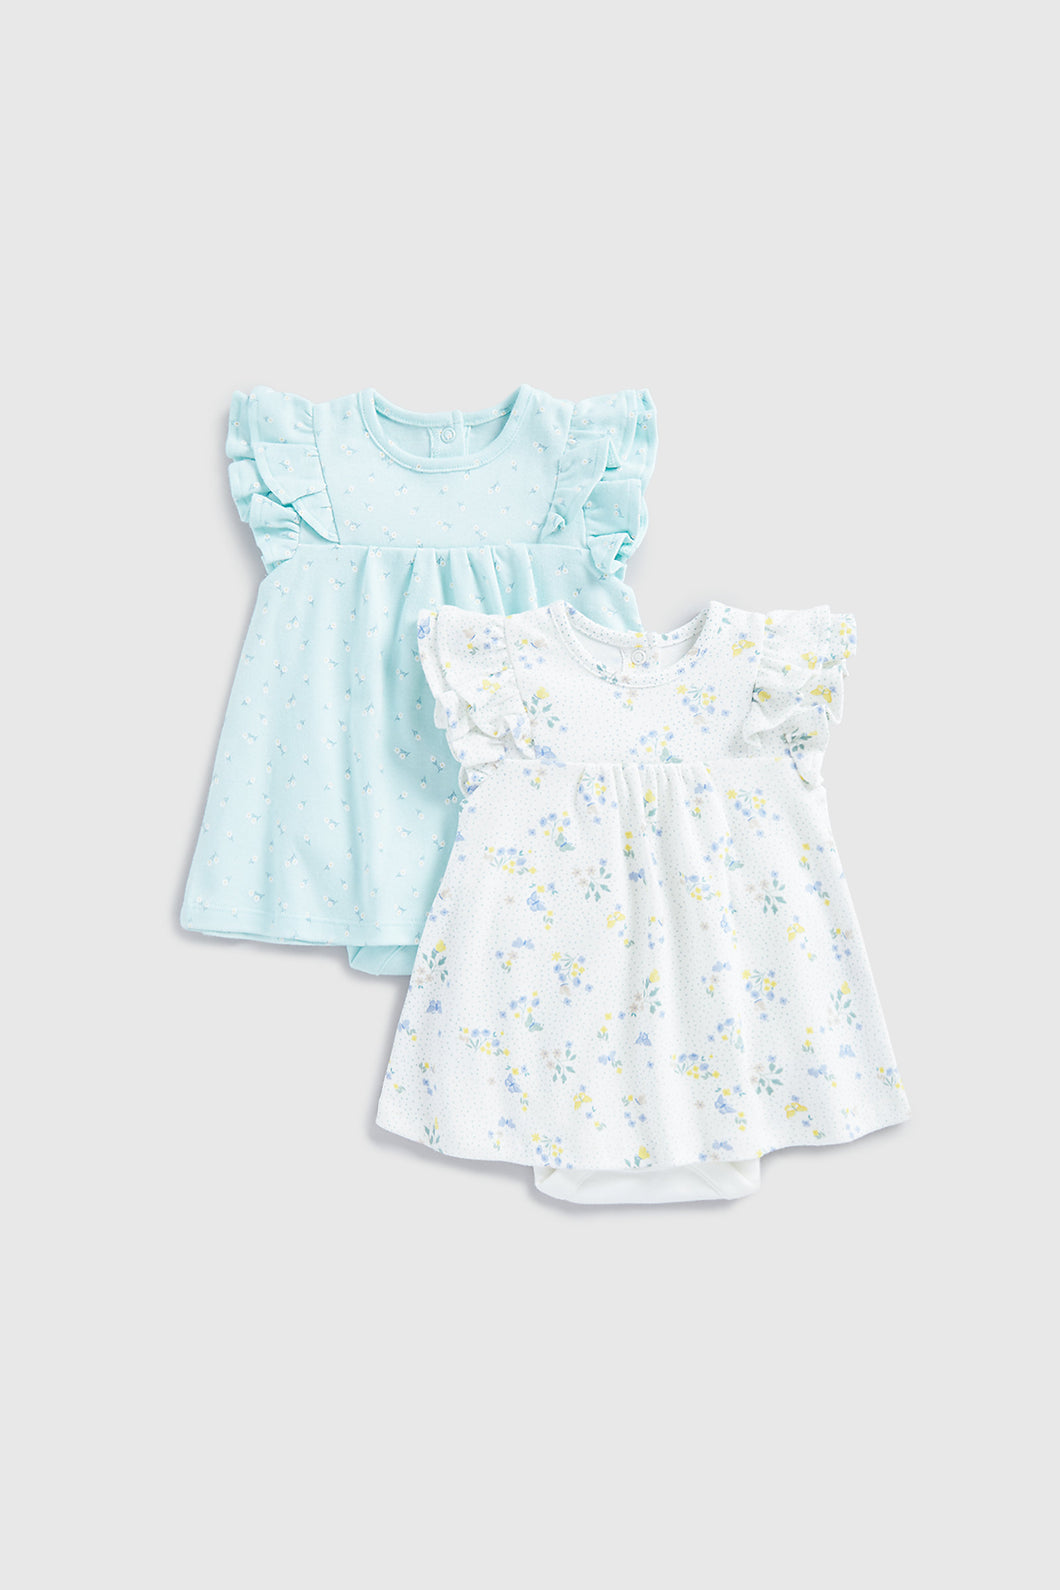 Mothercare Butterfly Romper Dresses - 2 Pack